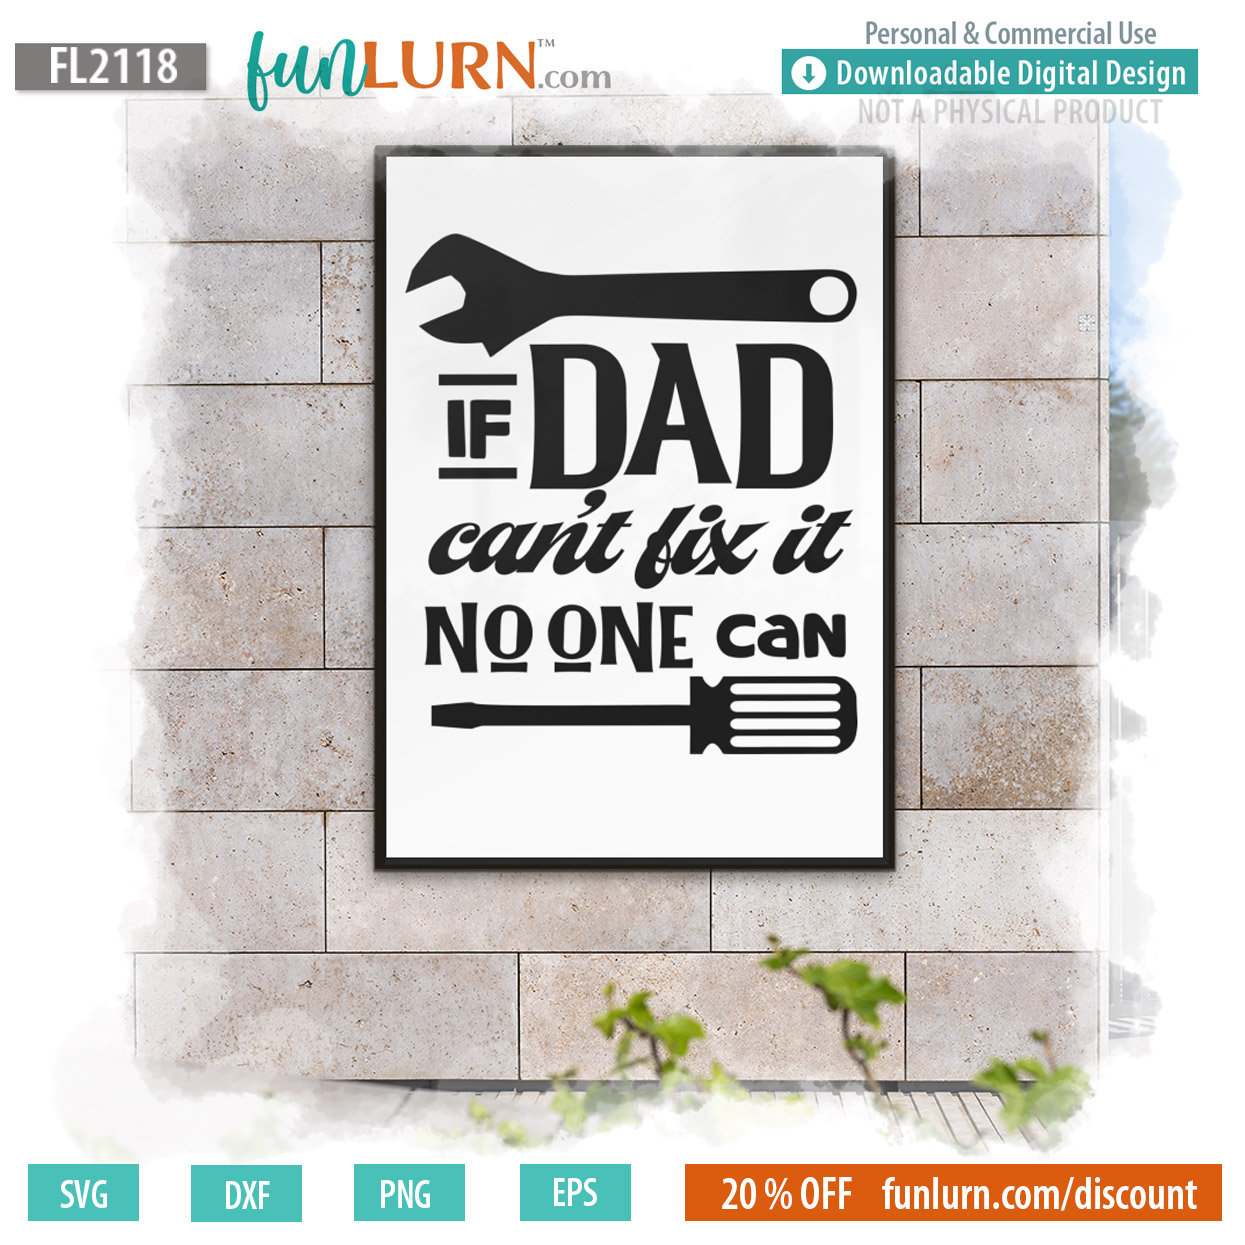 Download If Dad can't fix it no one can - FunLurn